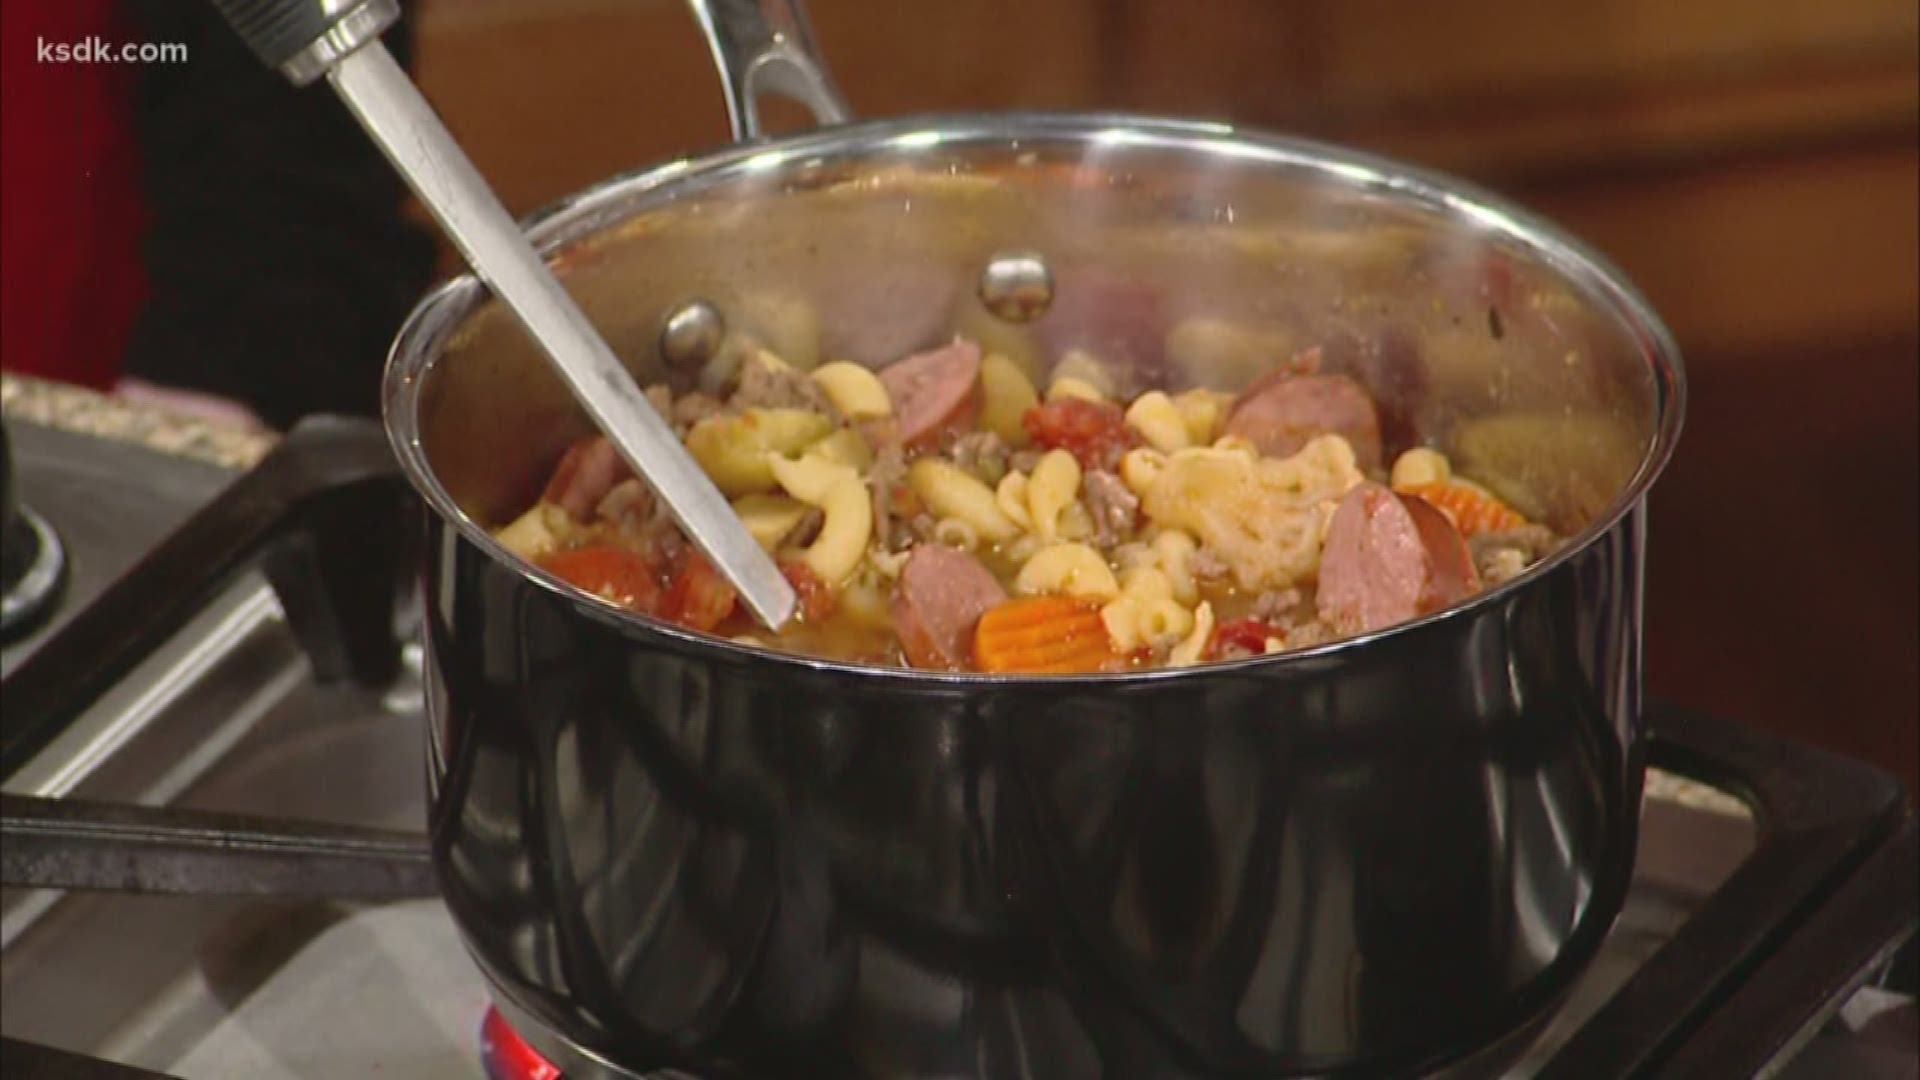 Jaelyn Peckman of Missouri Beef Council shared a recipe for a delicious fall soup.